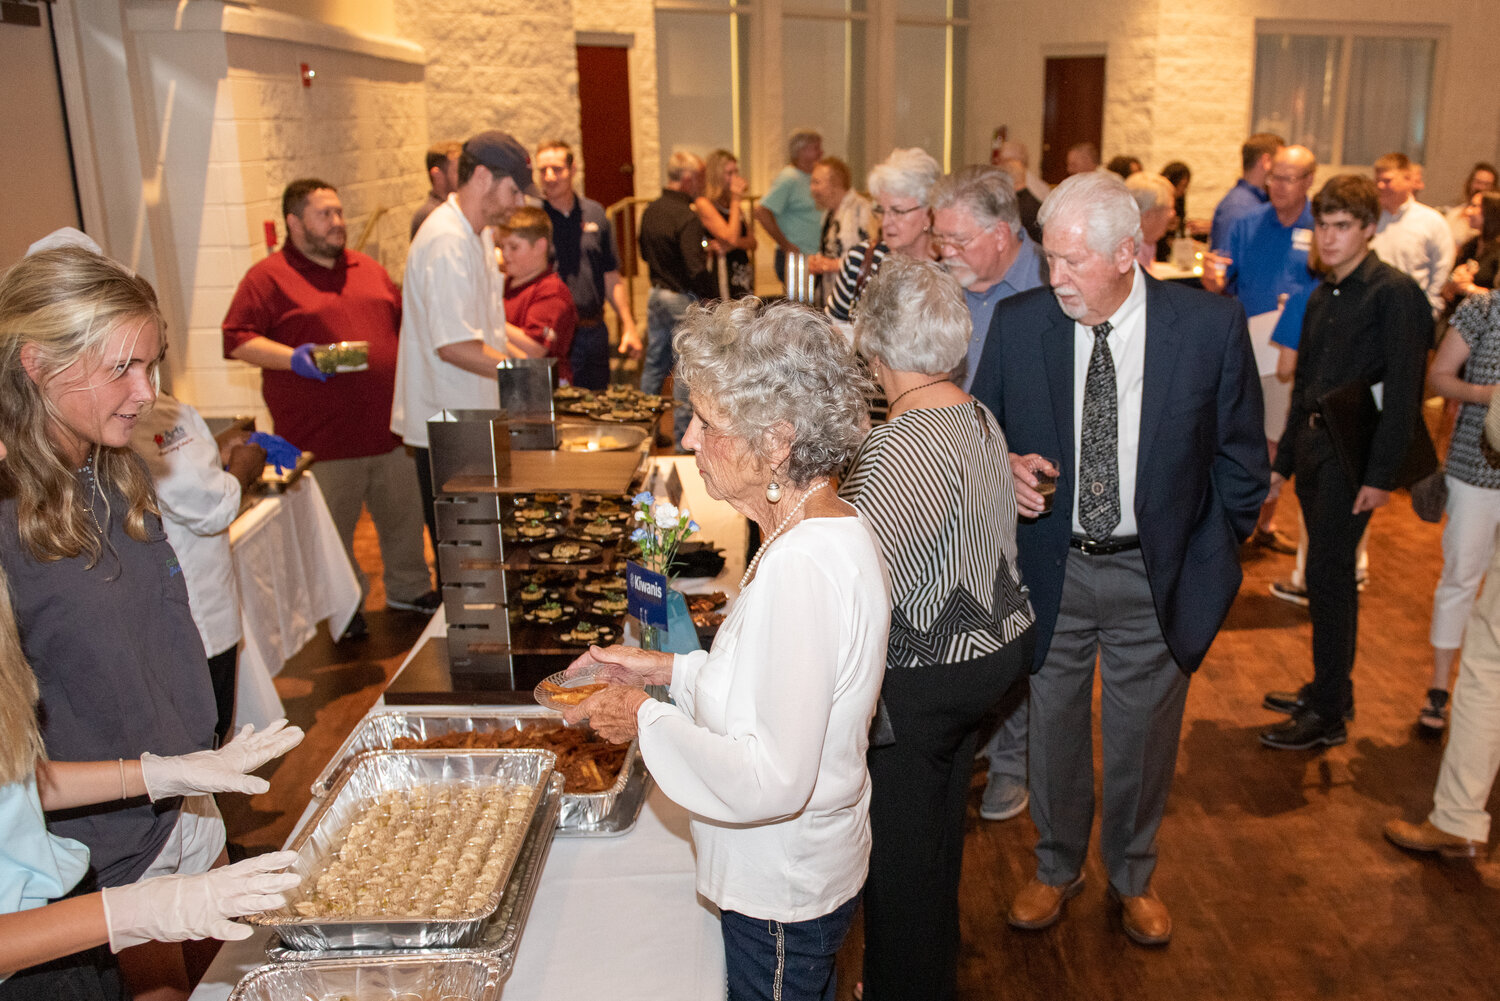 The Taste of the Towns is an evening of great food from 20 local restaurants, live music and silent auction.